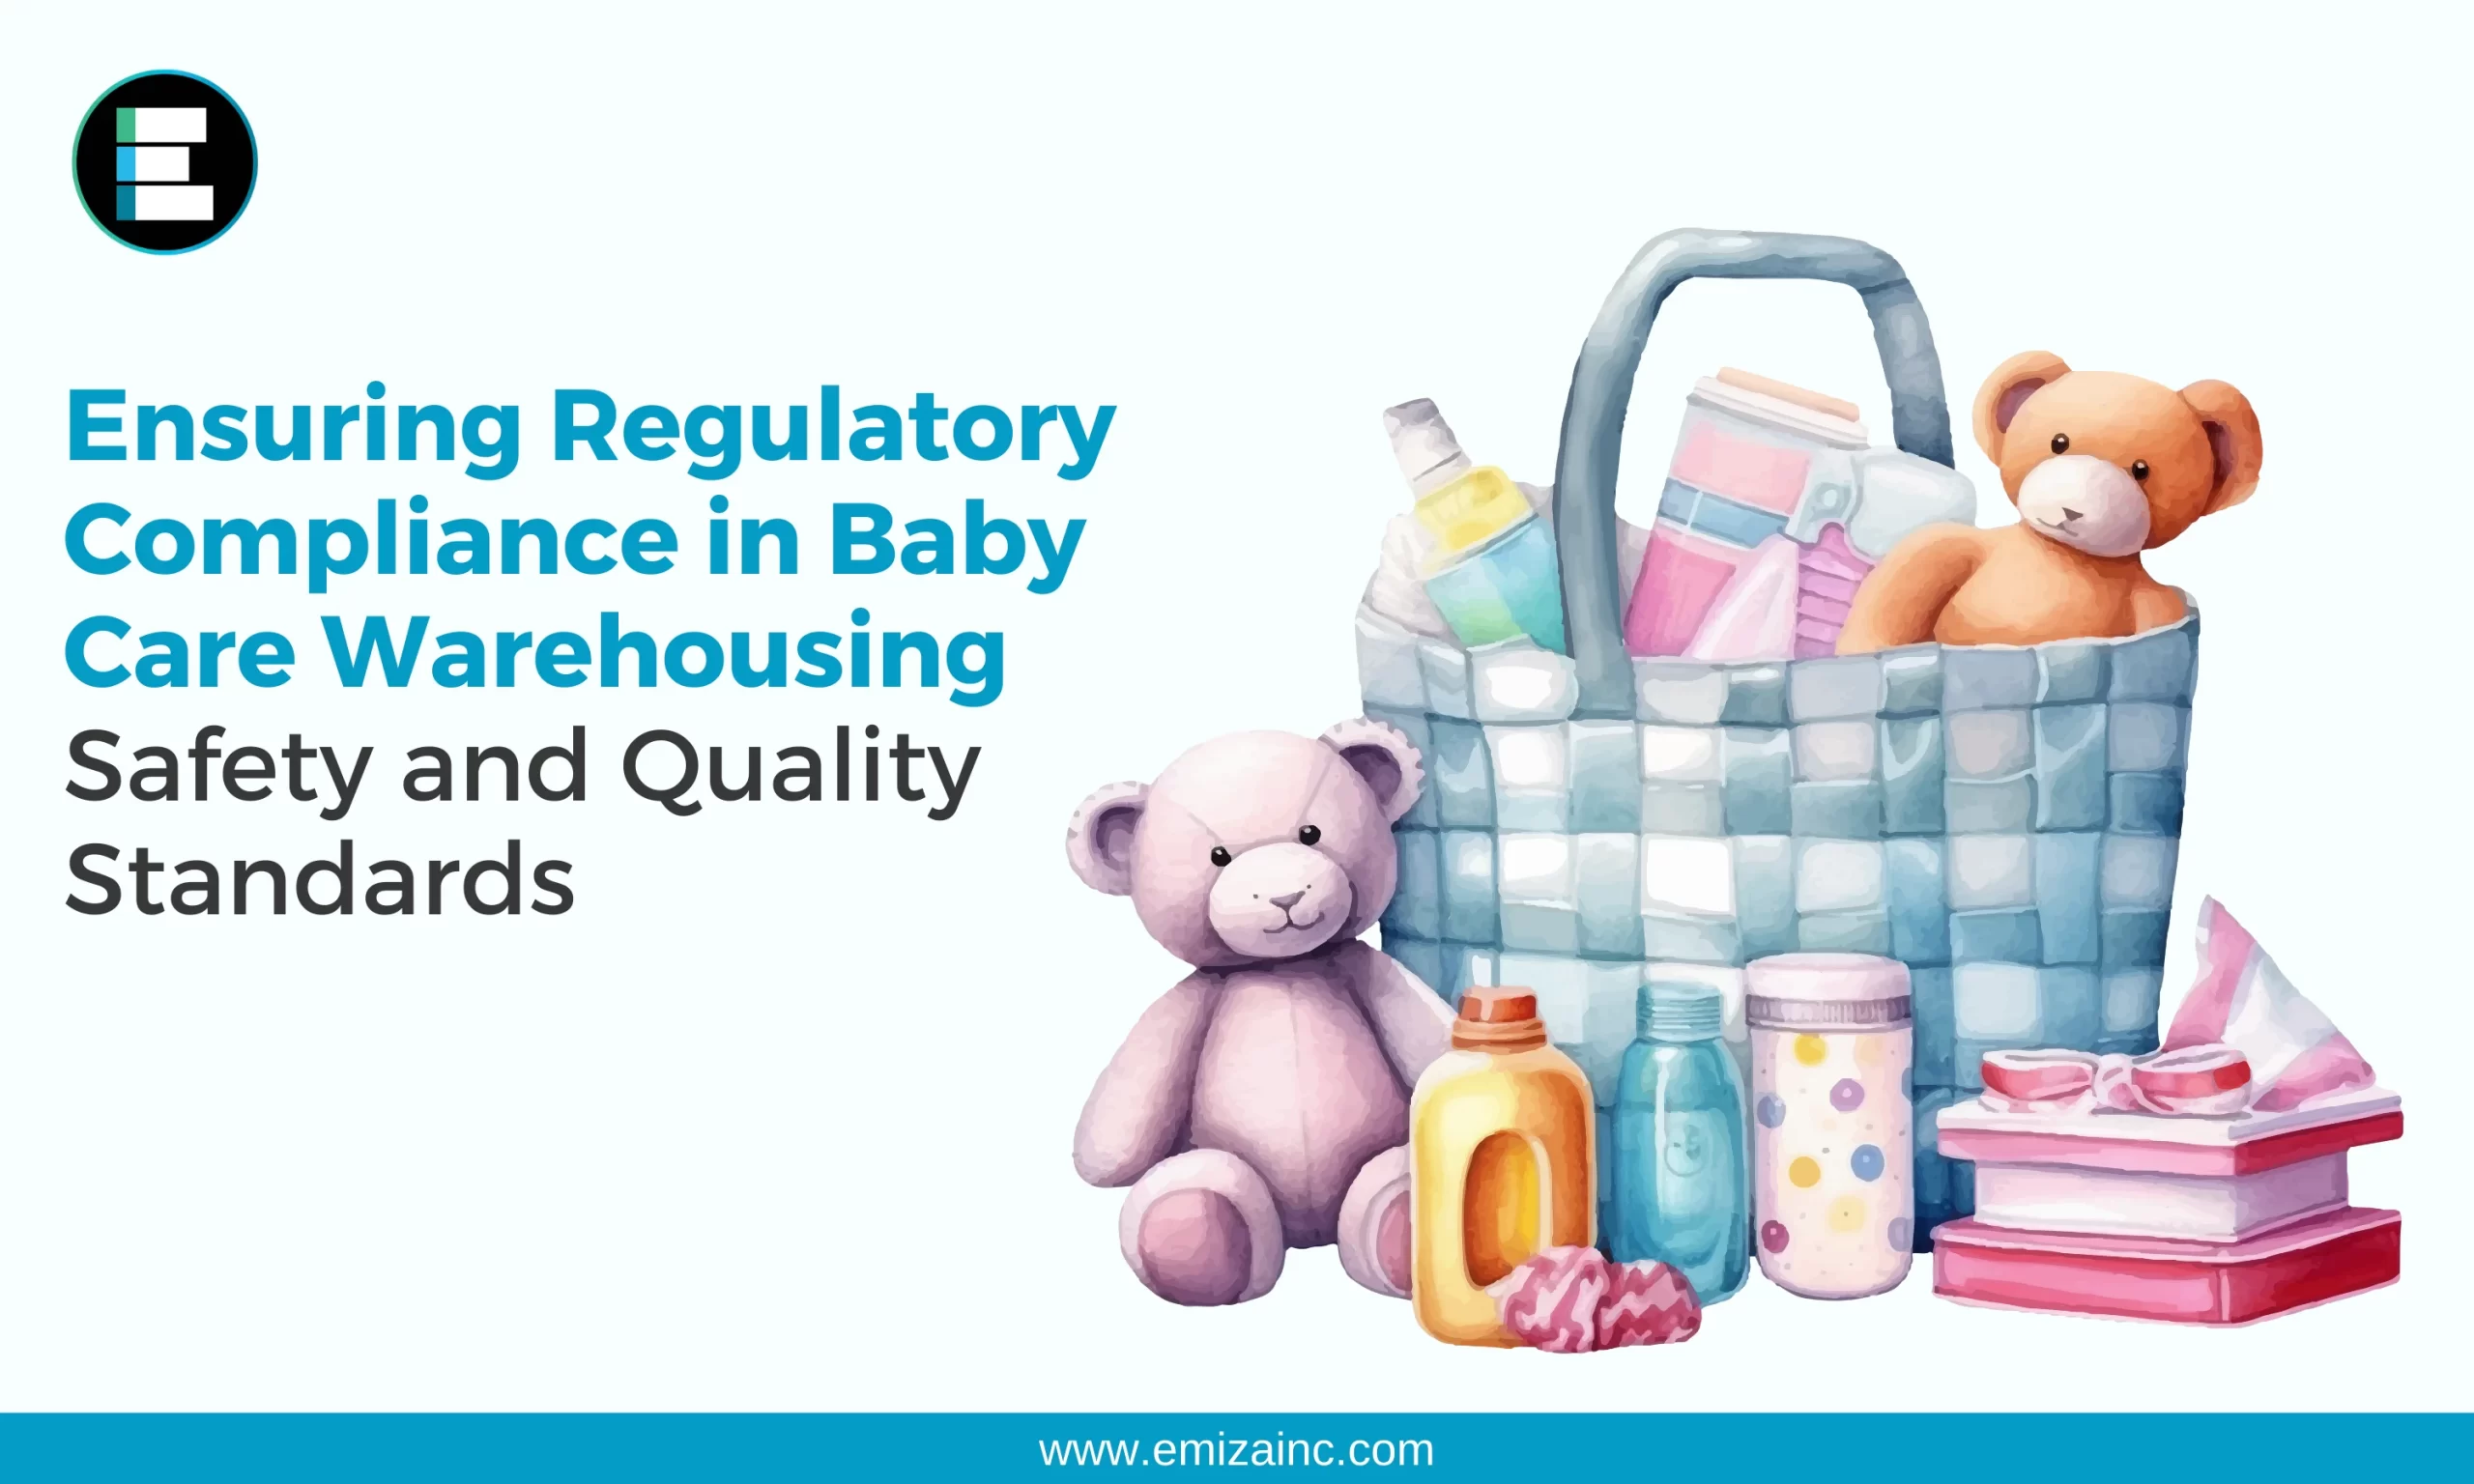 Ensuring Regulatory Compliance in Baby Care Warehousing Safety and Quality Standards